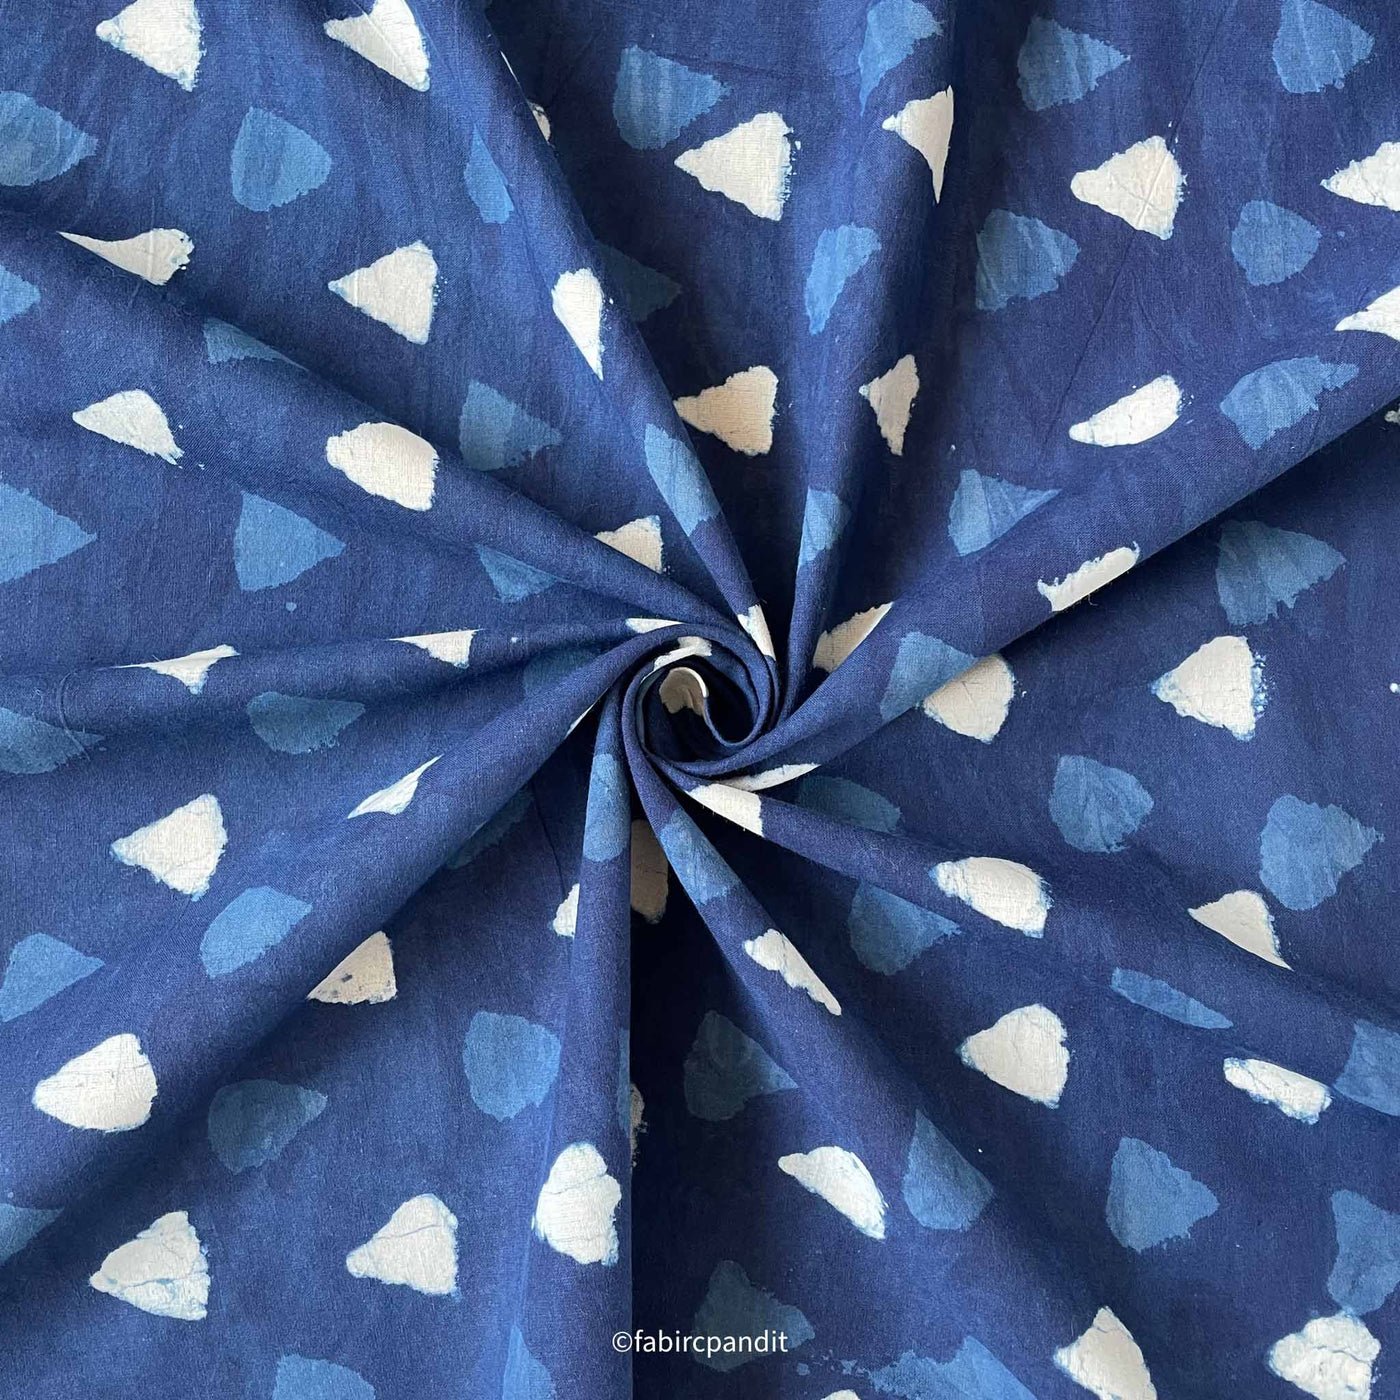 Fabric Pandit Fabric Indigo Dabu Natural Dyed White and Blue Triangles Hand Block Printed Pure Cotton Fabric (Width 43 inches)